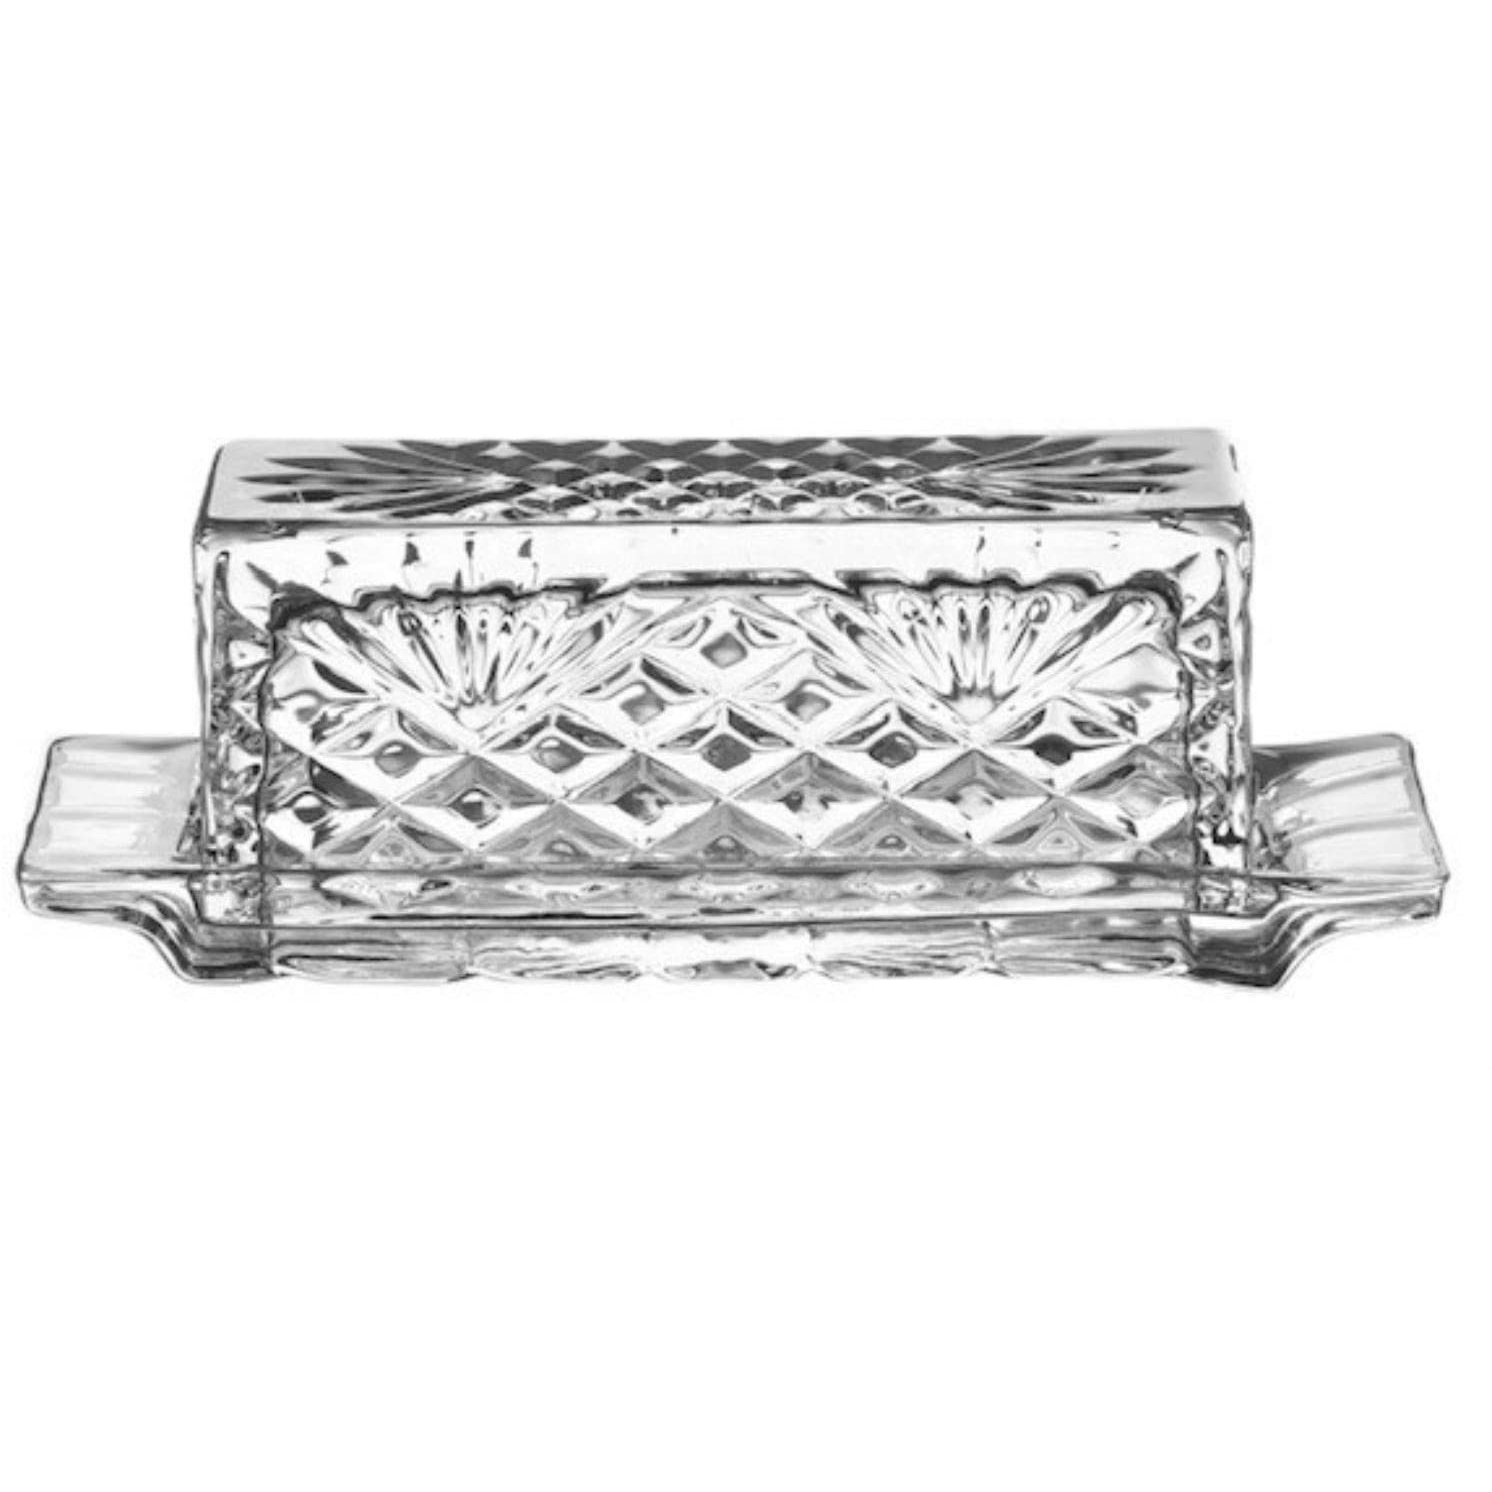 Crystal Butter Dish with Handled Lid